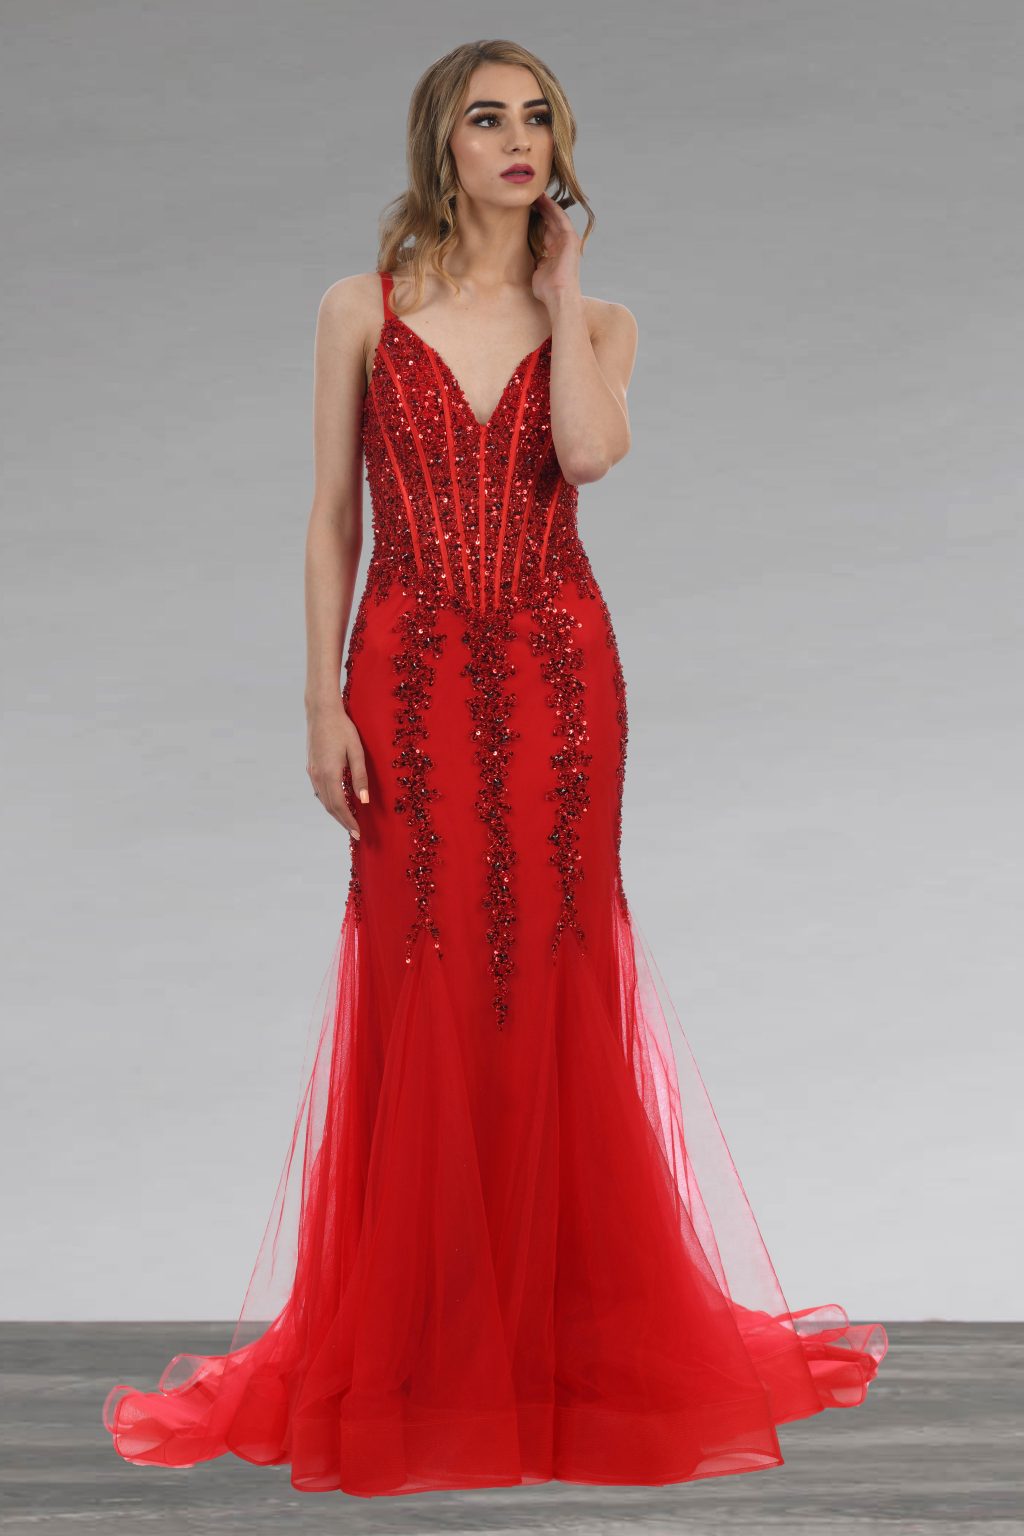 Full length corset style dress. AF80196 - Catherines of Partick